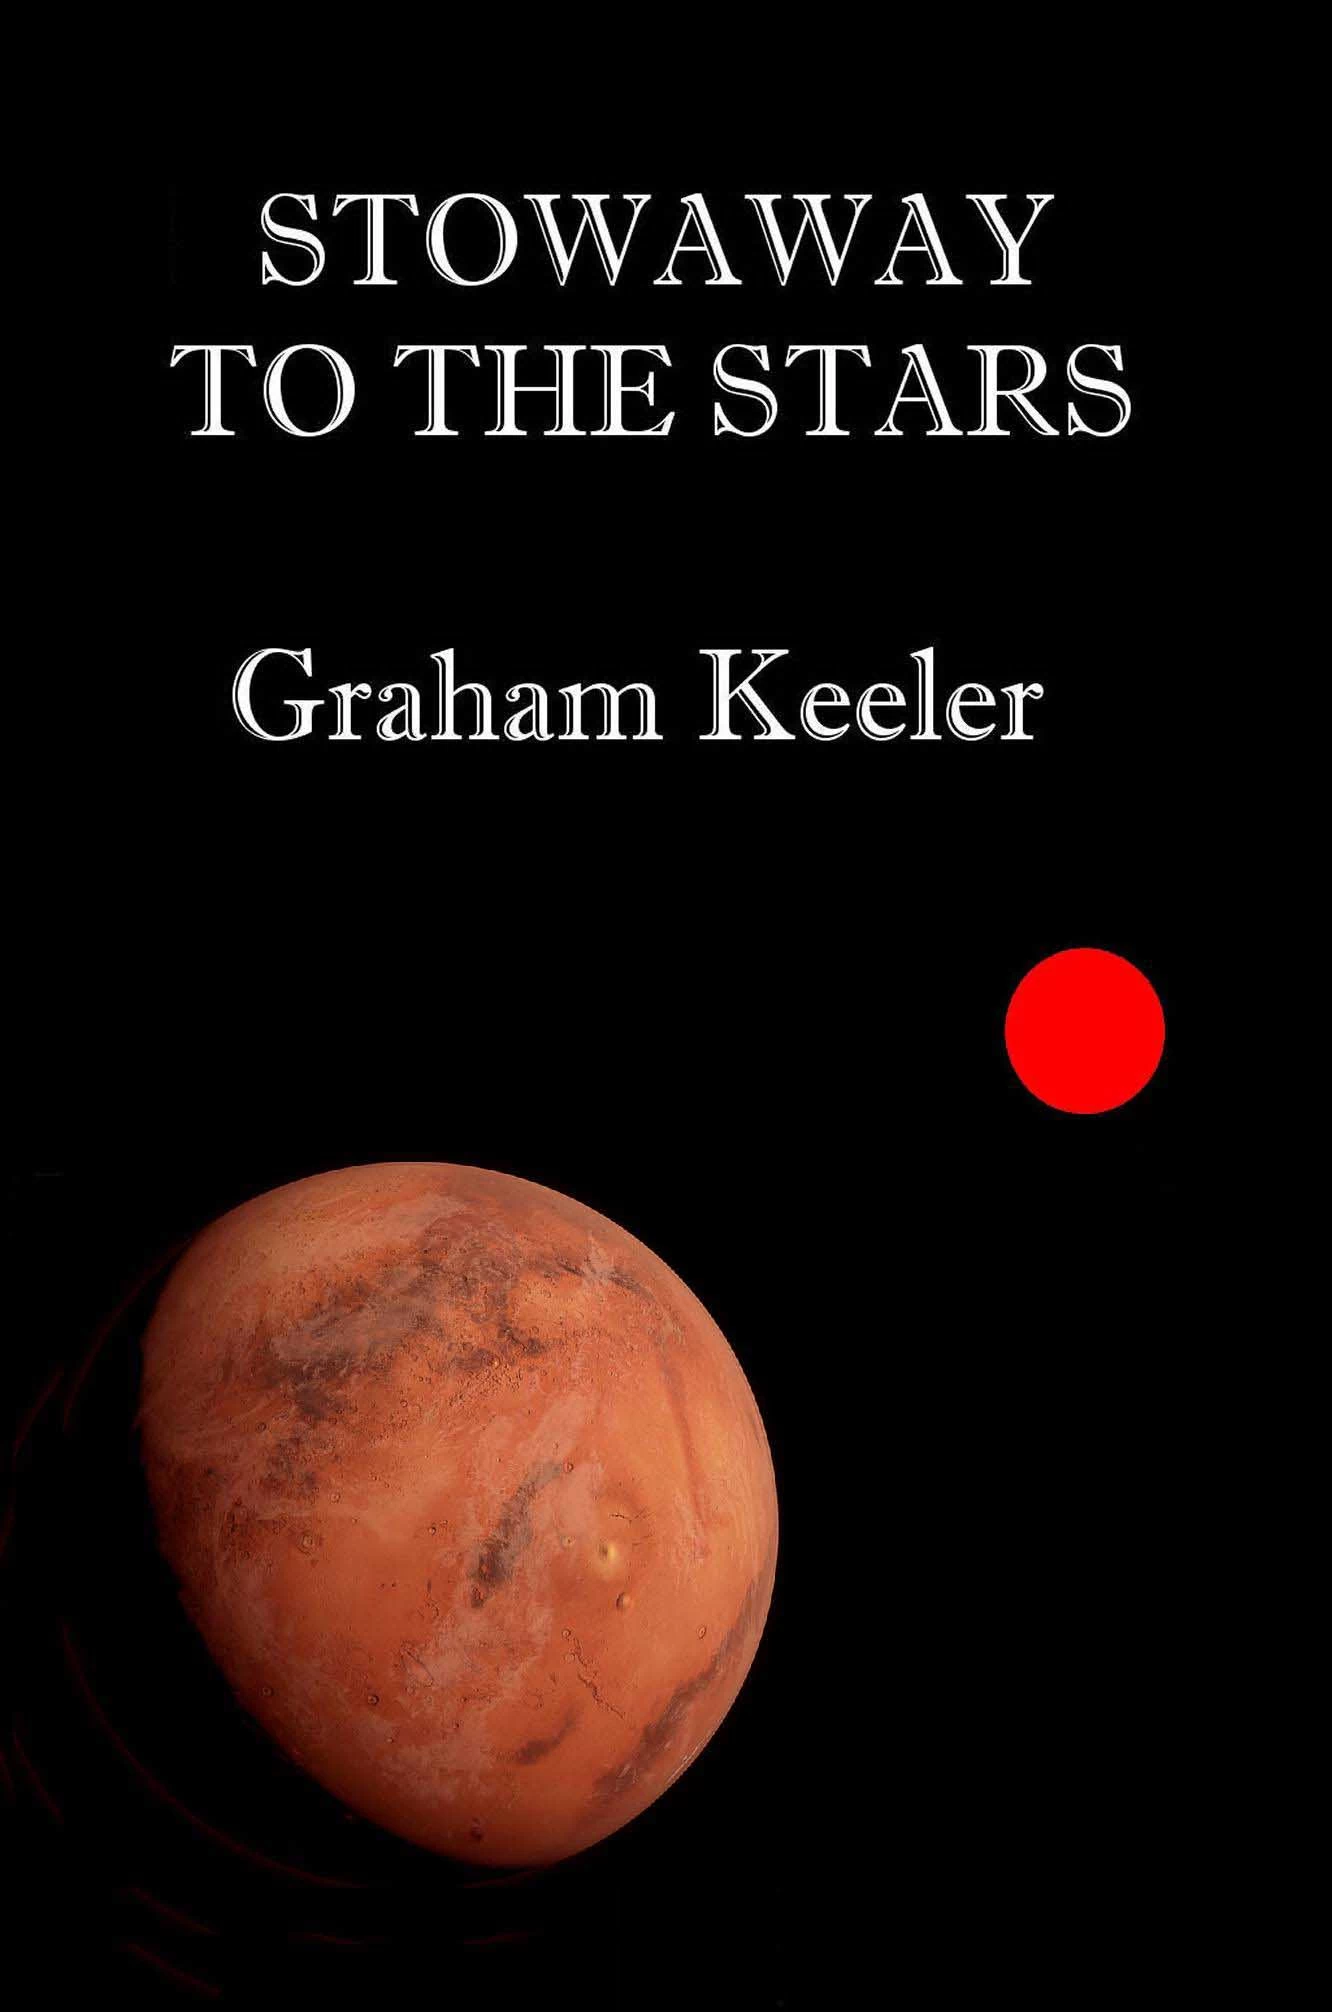 Stowaway to the Stars (2nd edition) - Graham Keeler